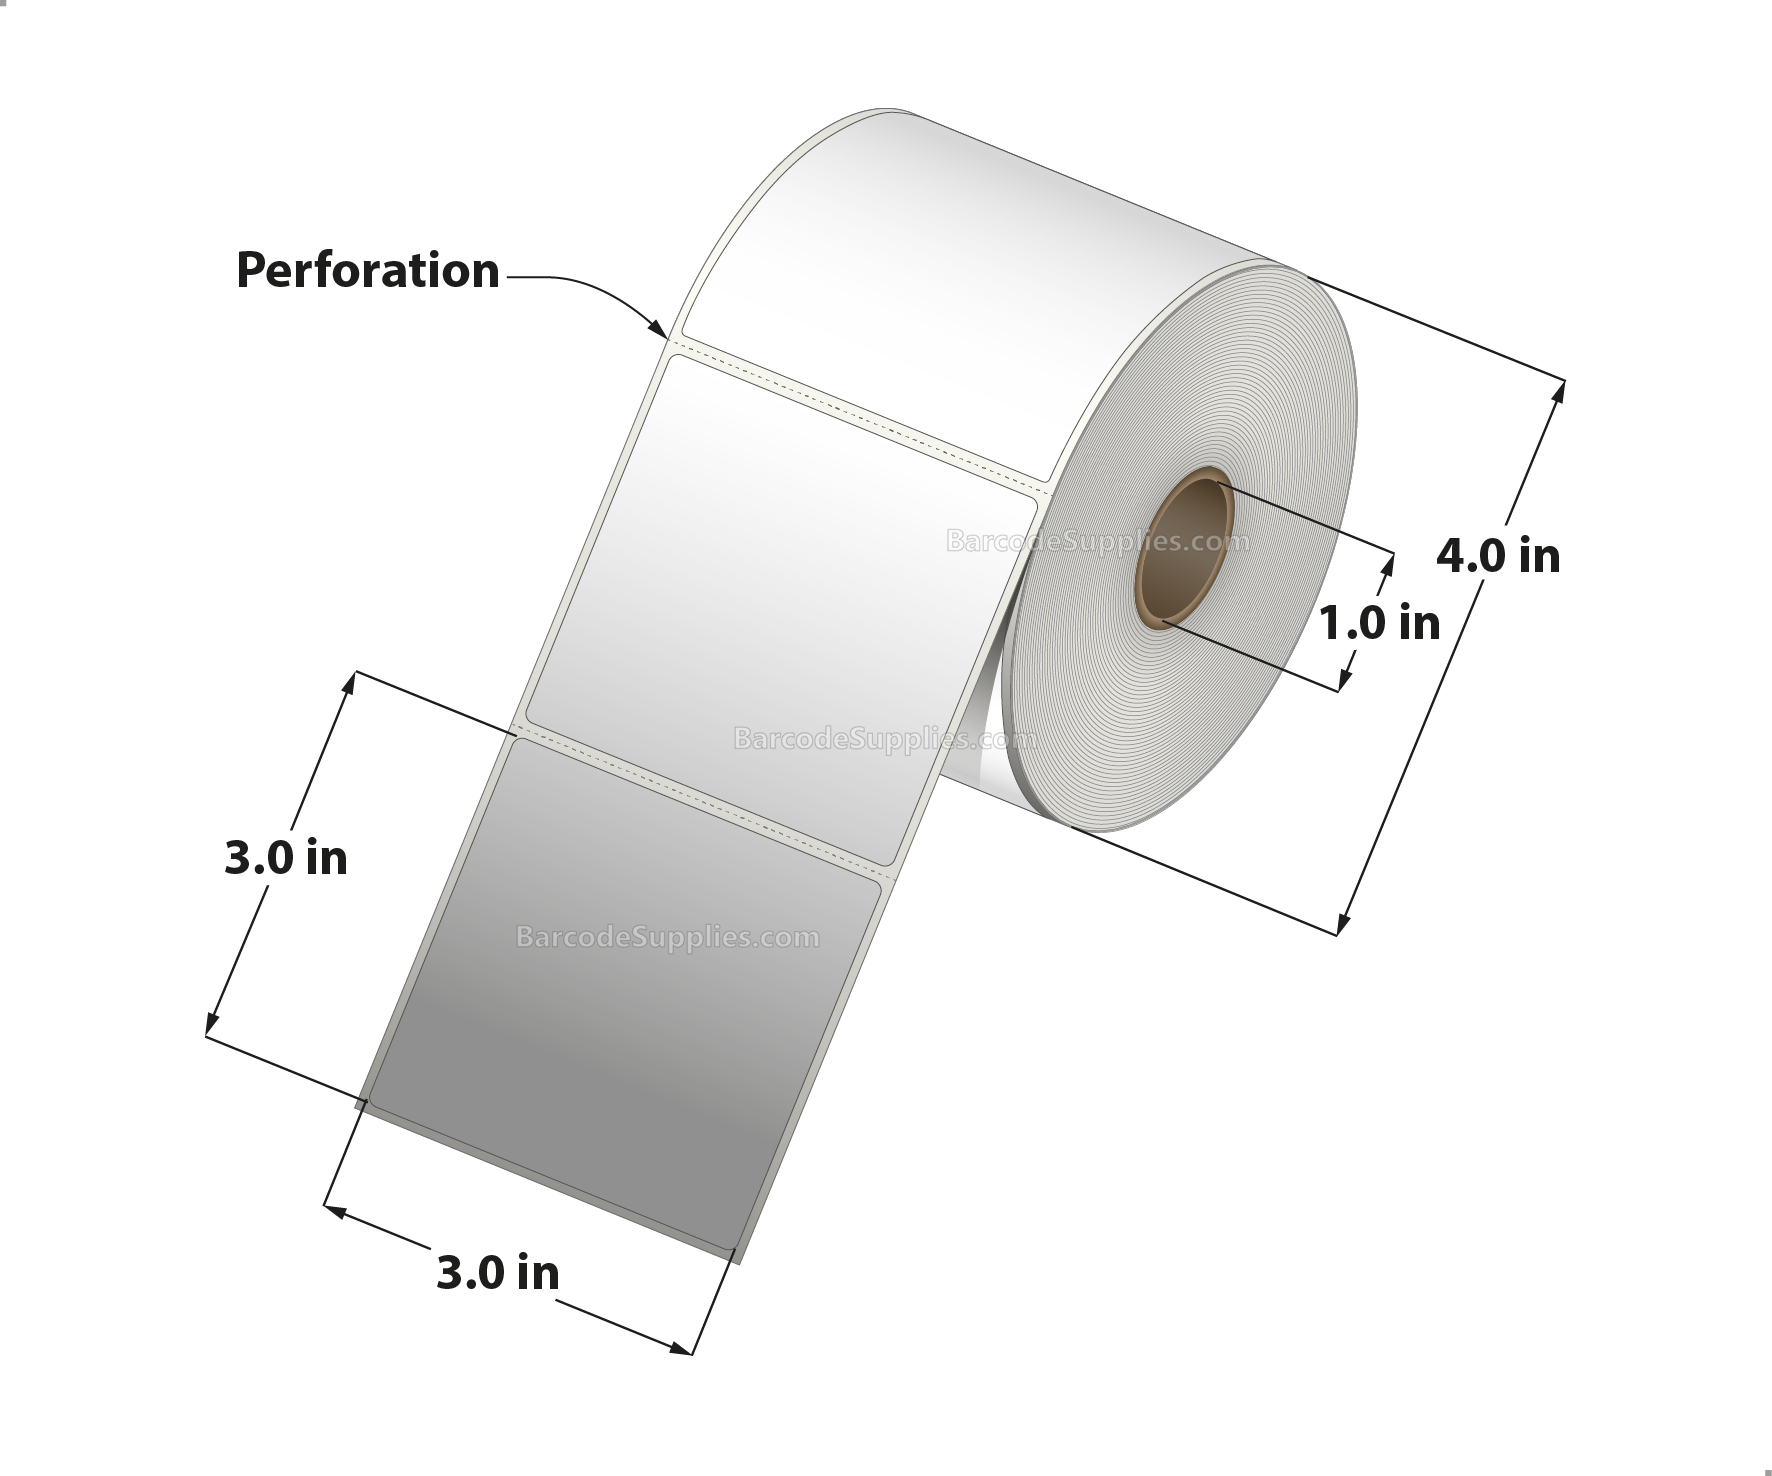 3 x 3 Direct Thermal White Labels With Acrylic Adhesive - Perforated - 500 Labels Per Roll - Carton Of 12 Rolls - 6000 Labels Total - MPN: RD-3-3-500-1